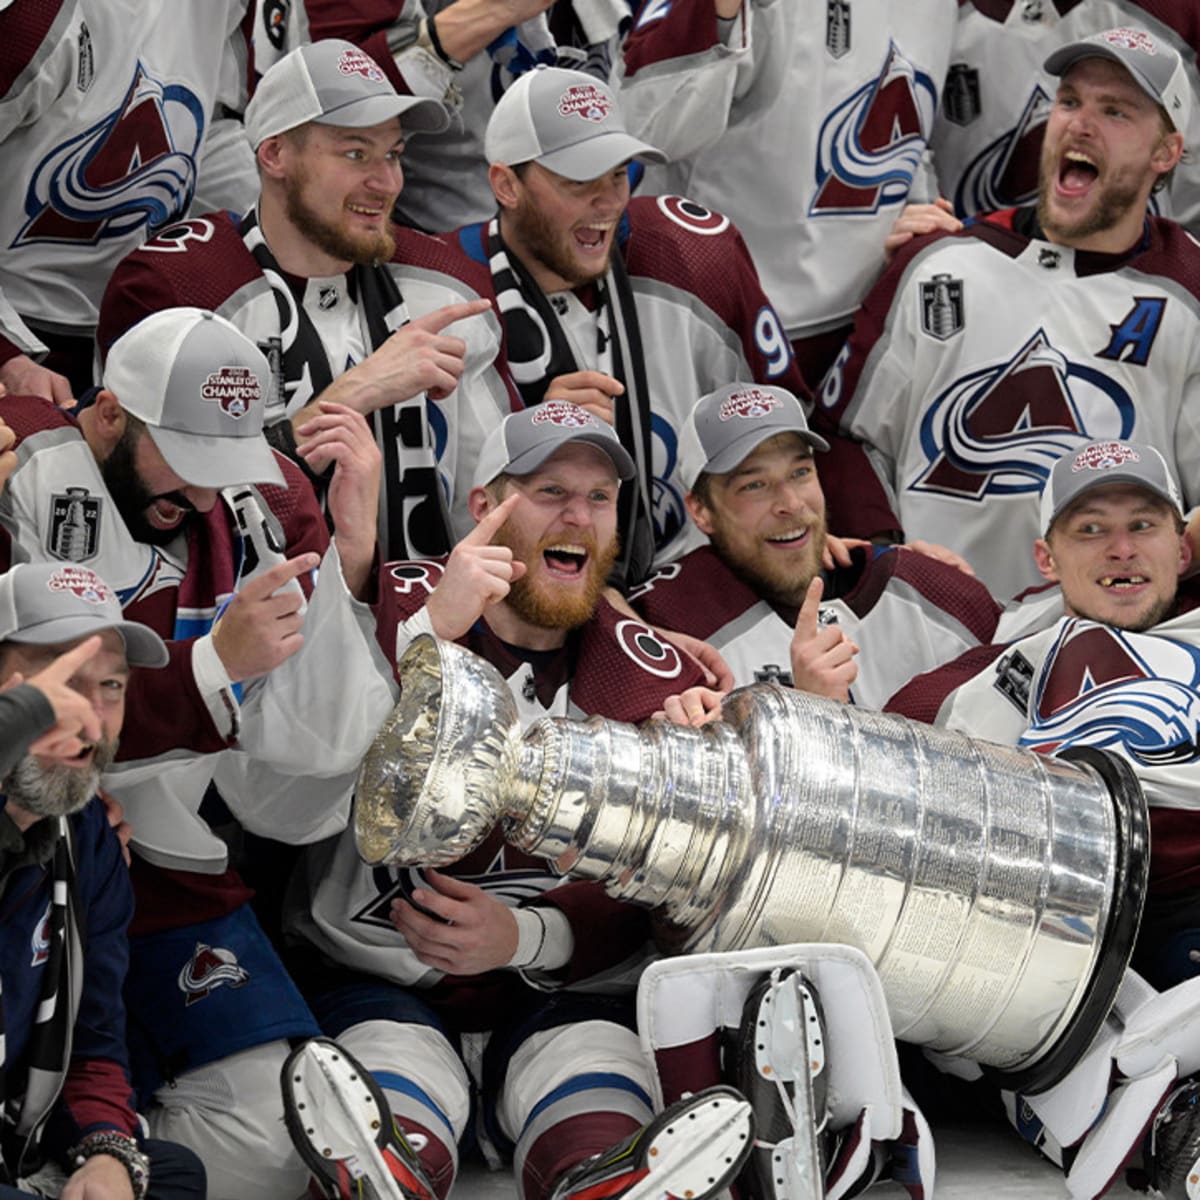 NHL Playoffs Recap & Preview: NHL Scores and Odds